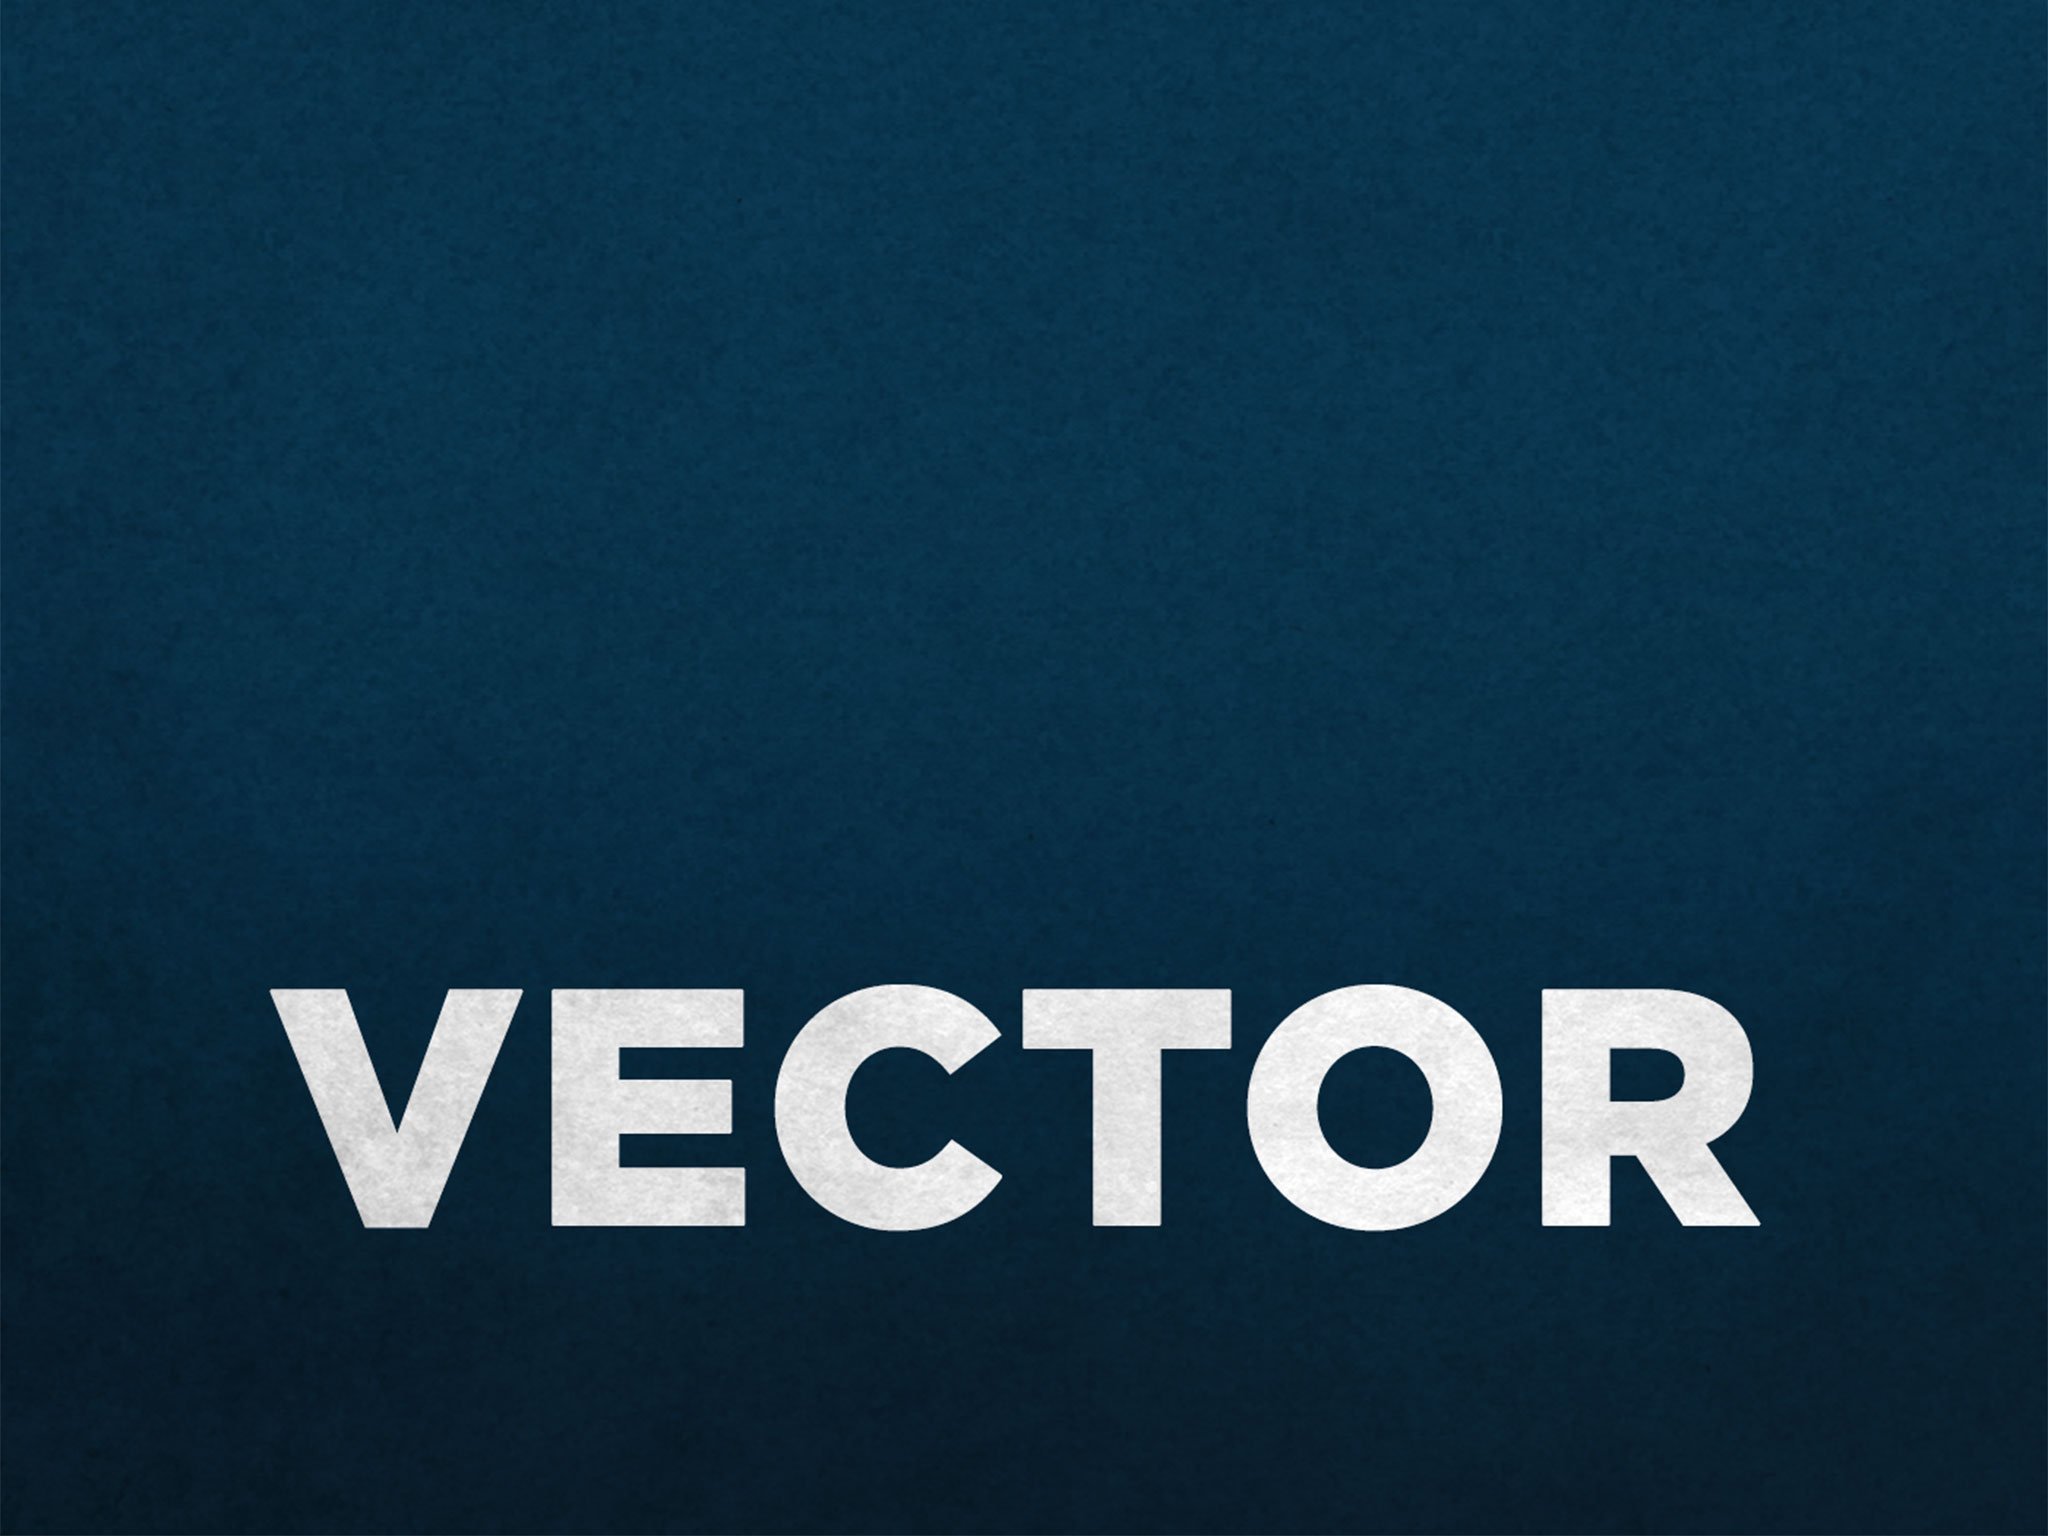 Introducing VECTOR, our new, highly focused tech podcast!